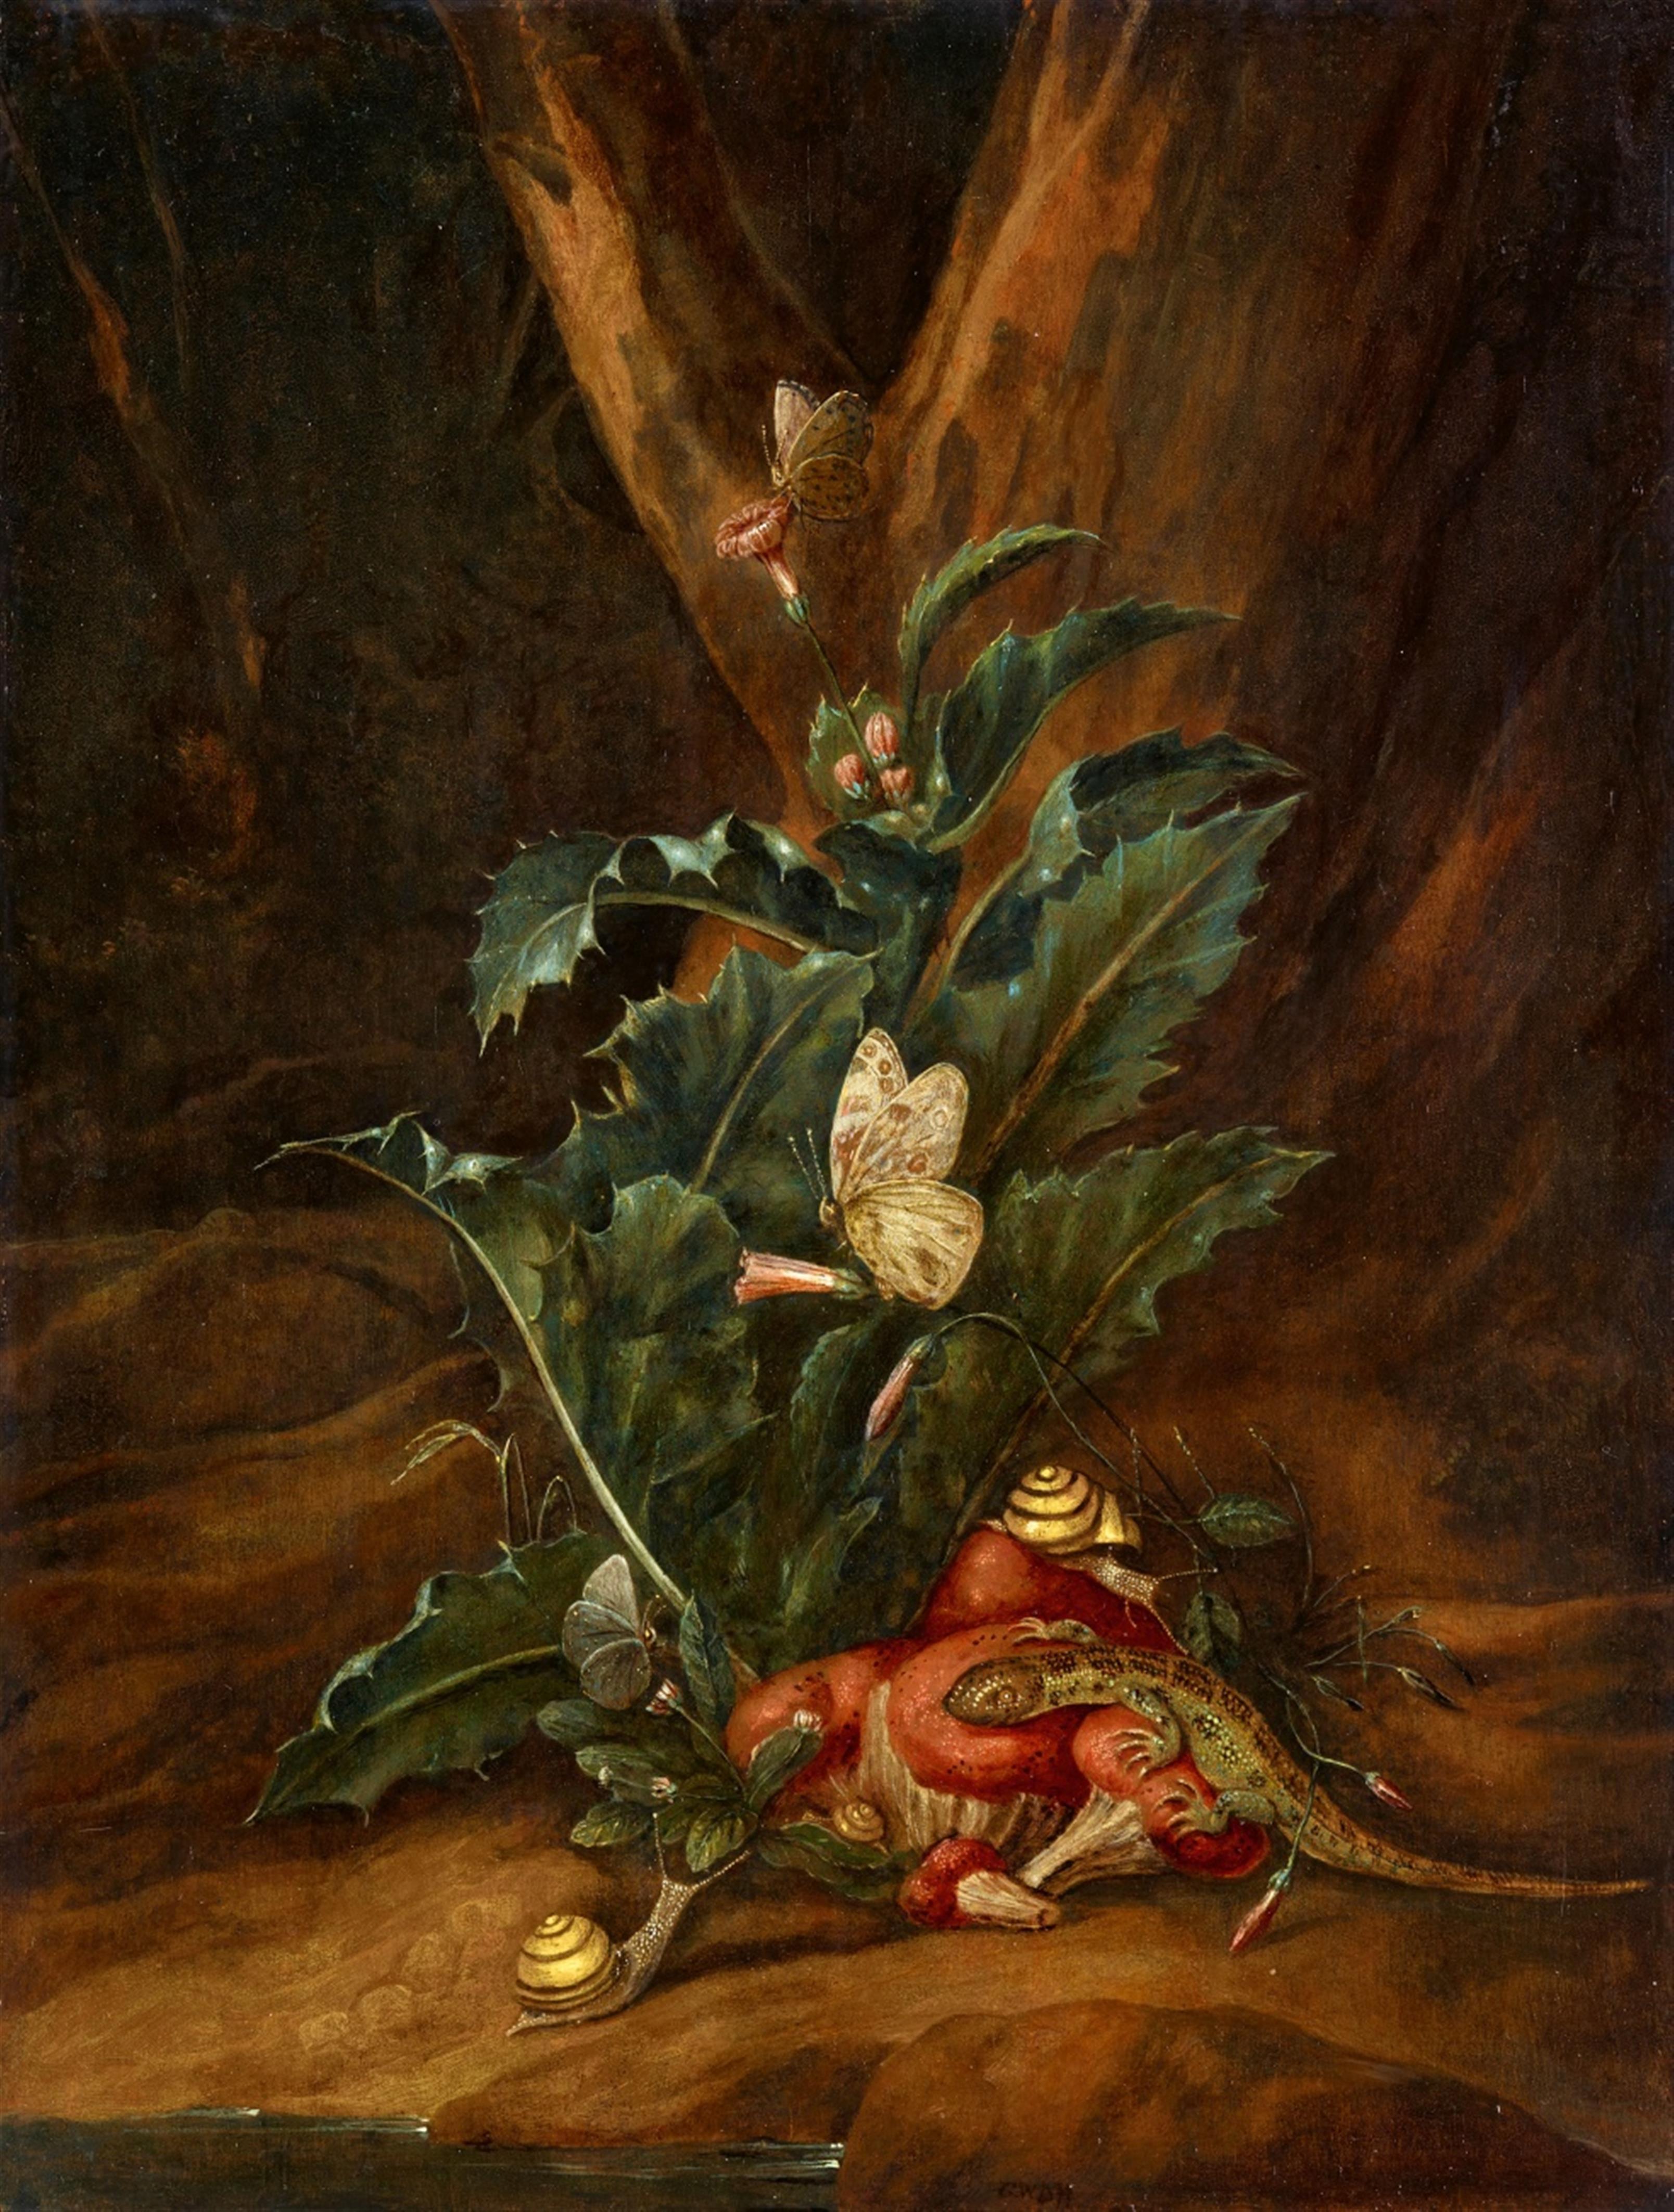 Carl Wilhelm de Hamilton - Forest Floor with a Thistle, Mushrooms, Snails, and a Lizard - image-1